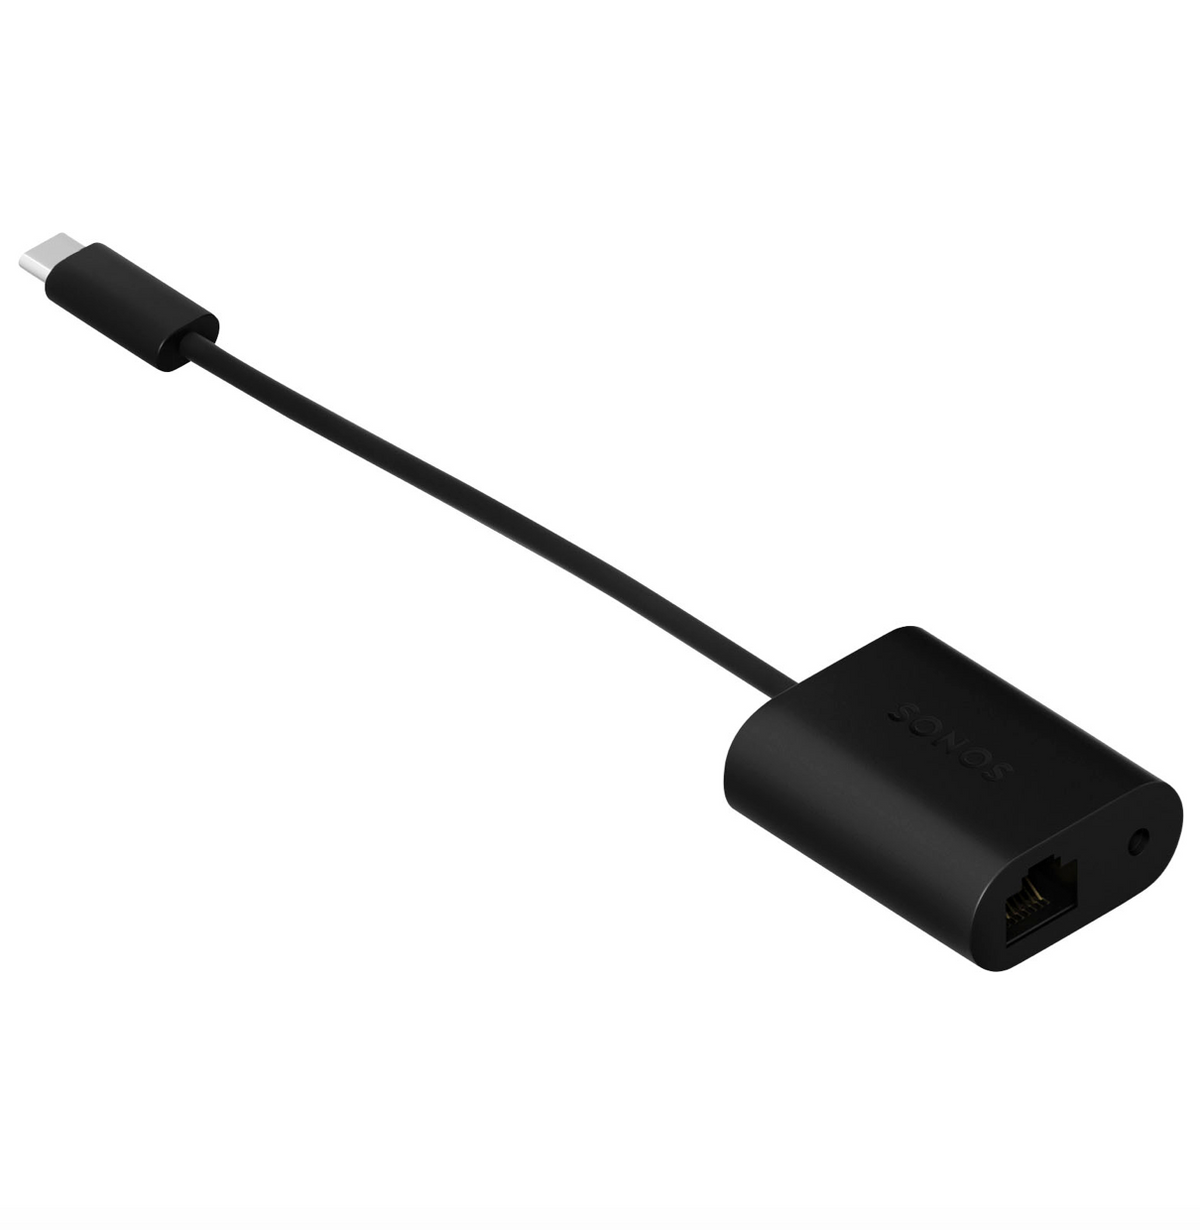 Sonos Combo Dongle